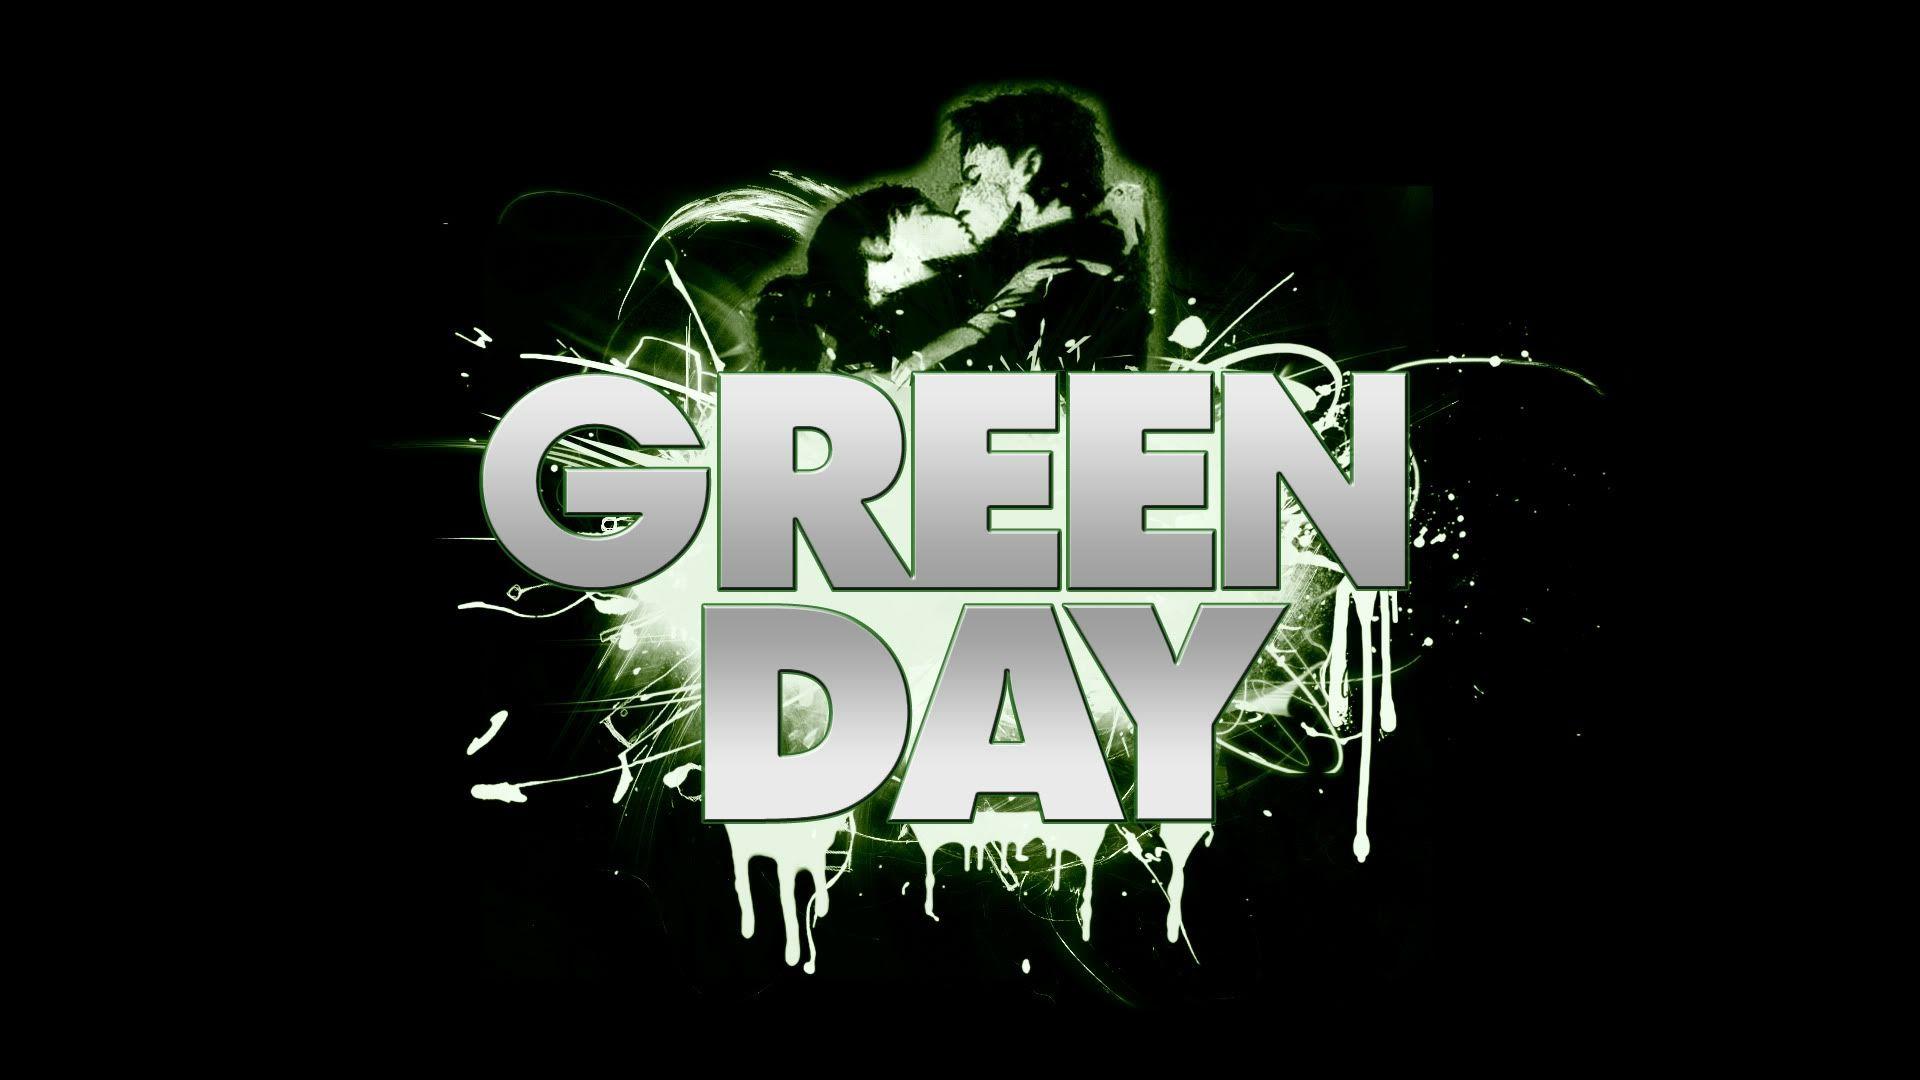 Download Wallpaper 1920x1080 green day, letters, darkness, sign